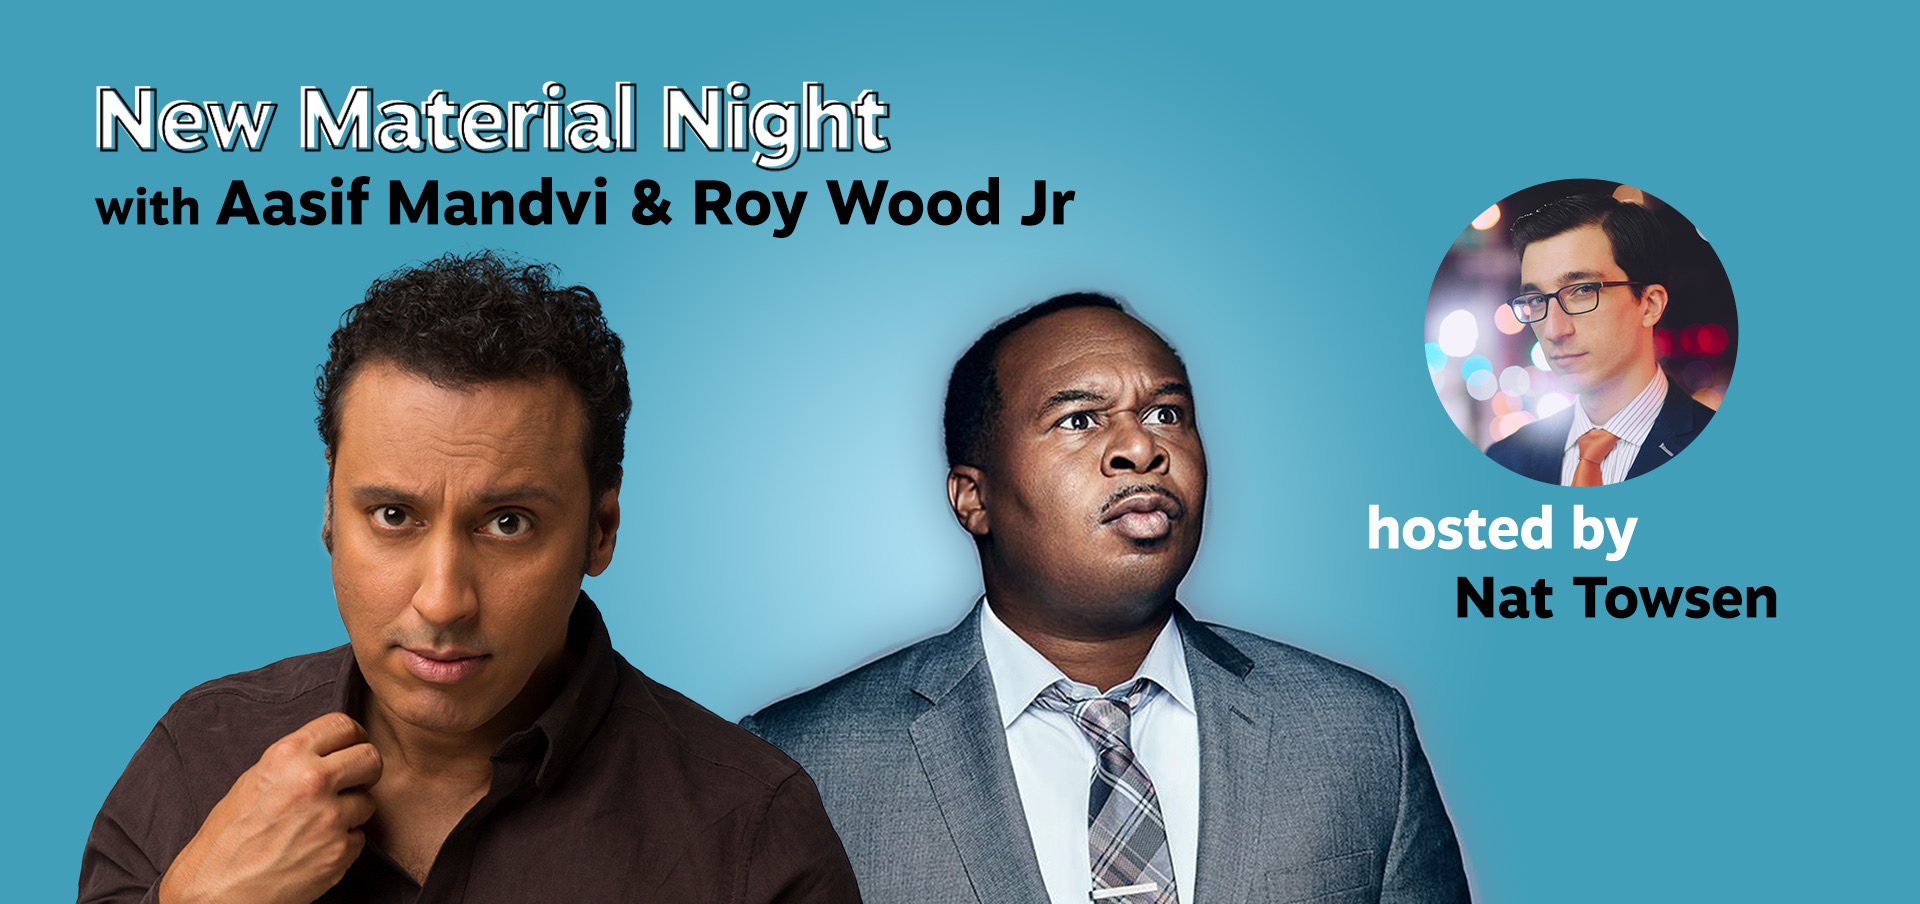 "New Material Night" with Roy Wood Jr and Aasif Mandvi